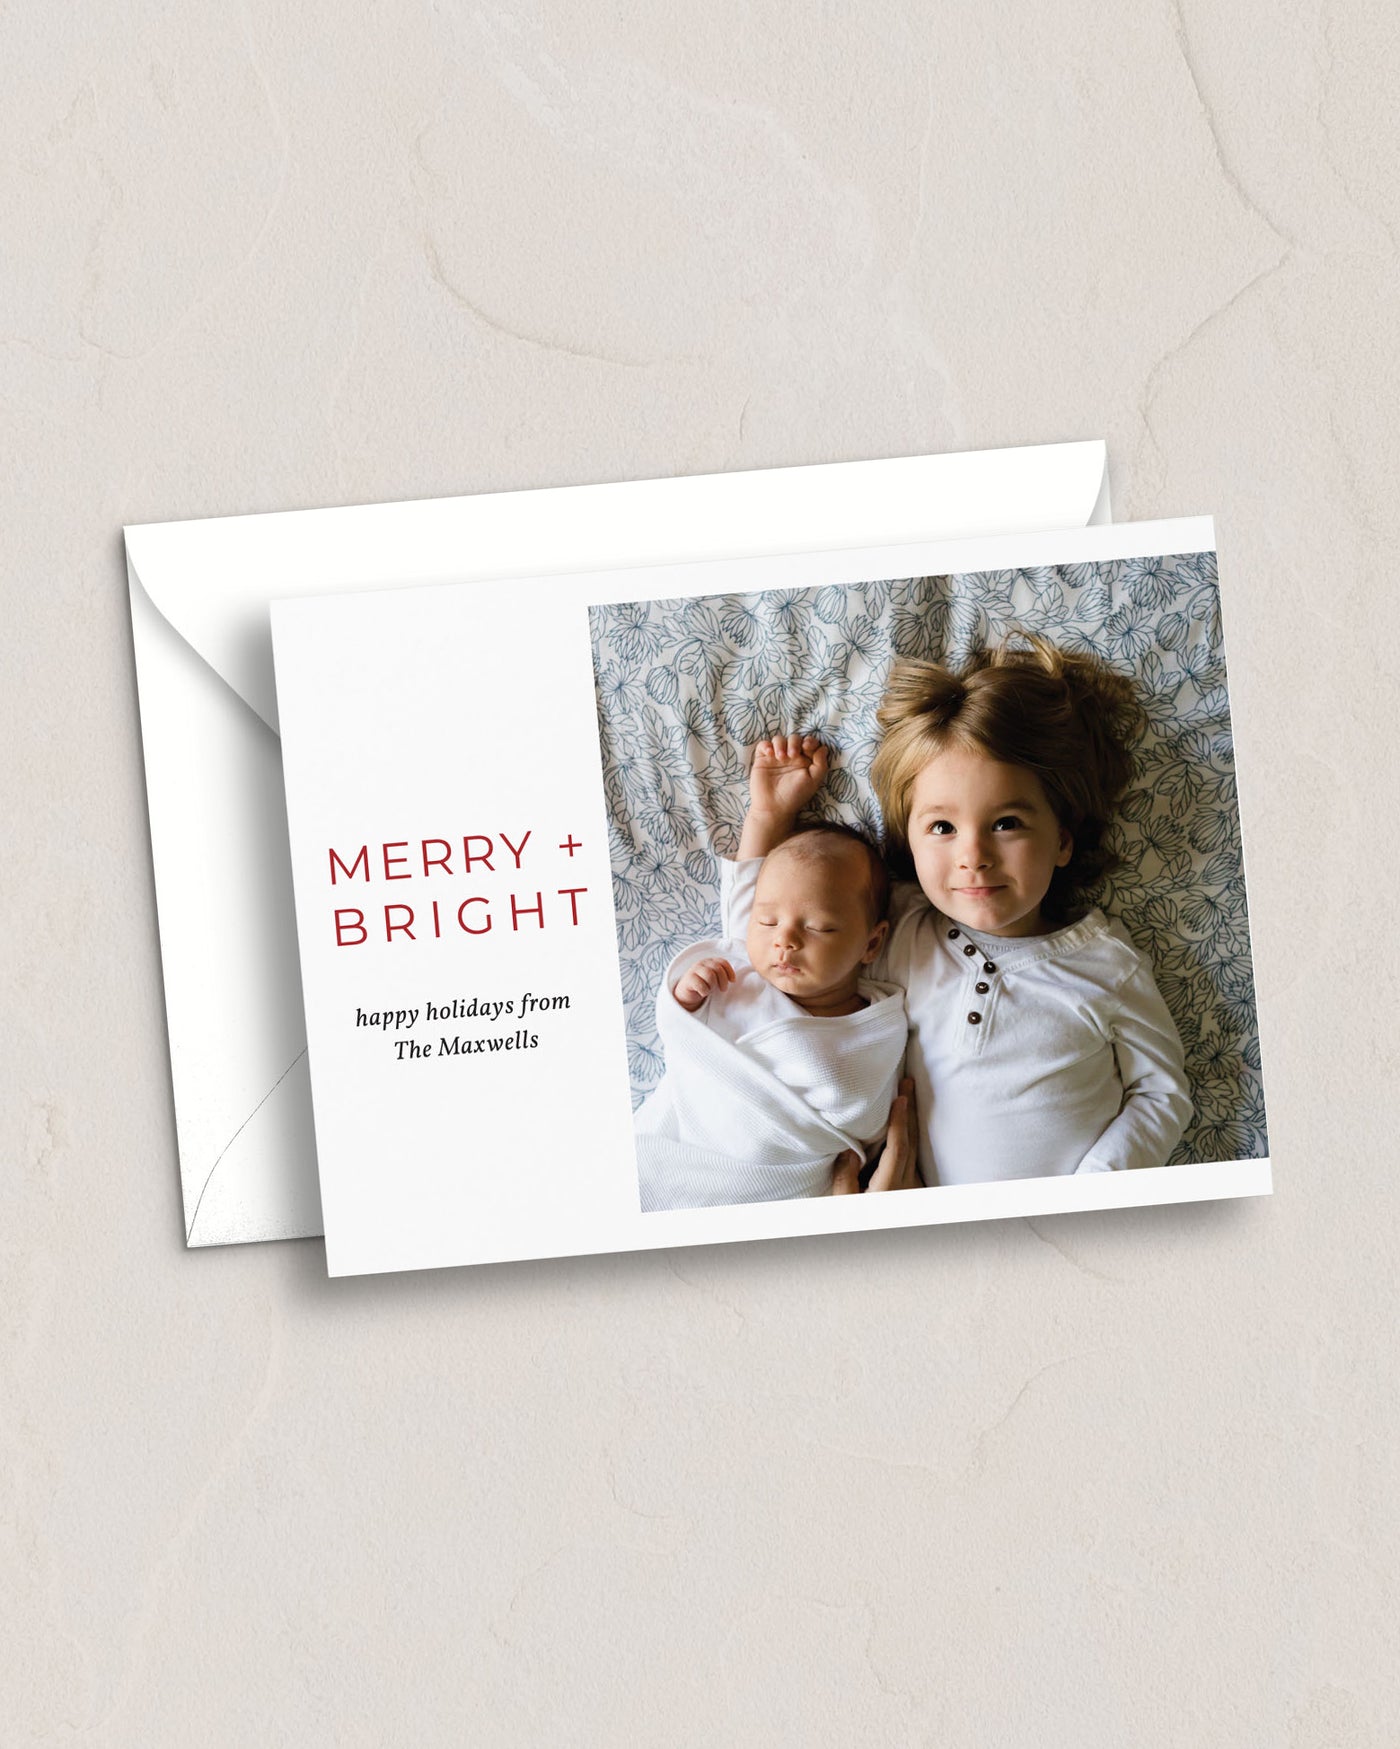 Merry + Bright Photo Card from Leighwood Design Studio